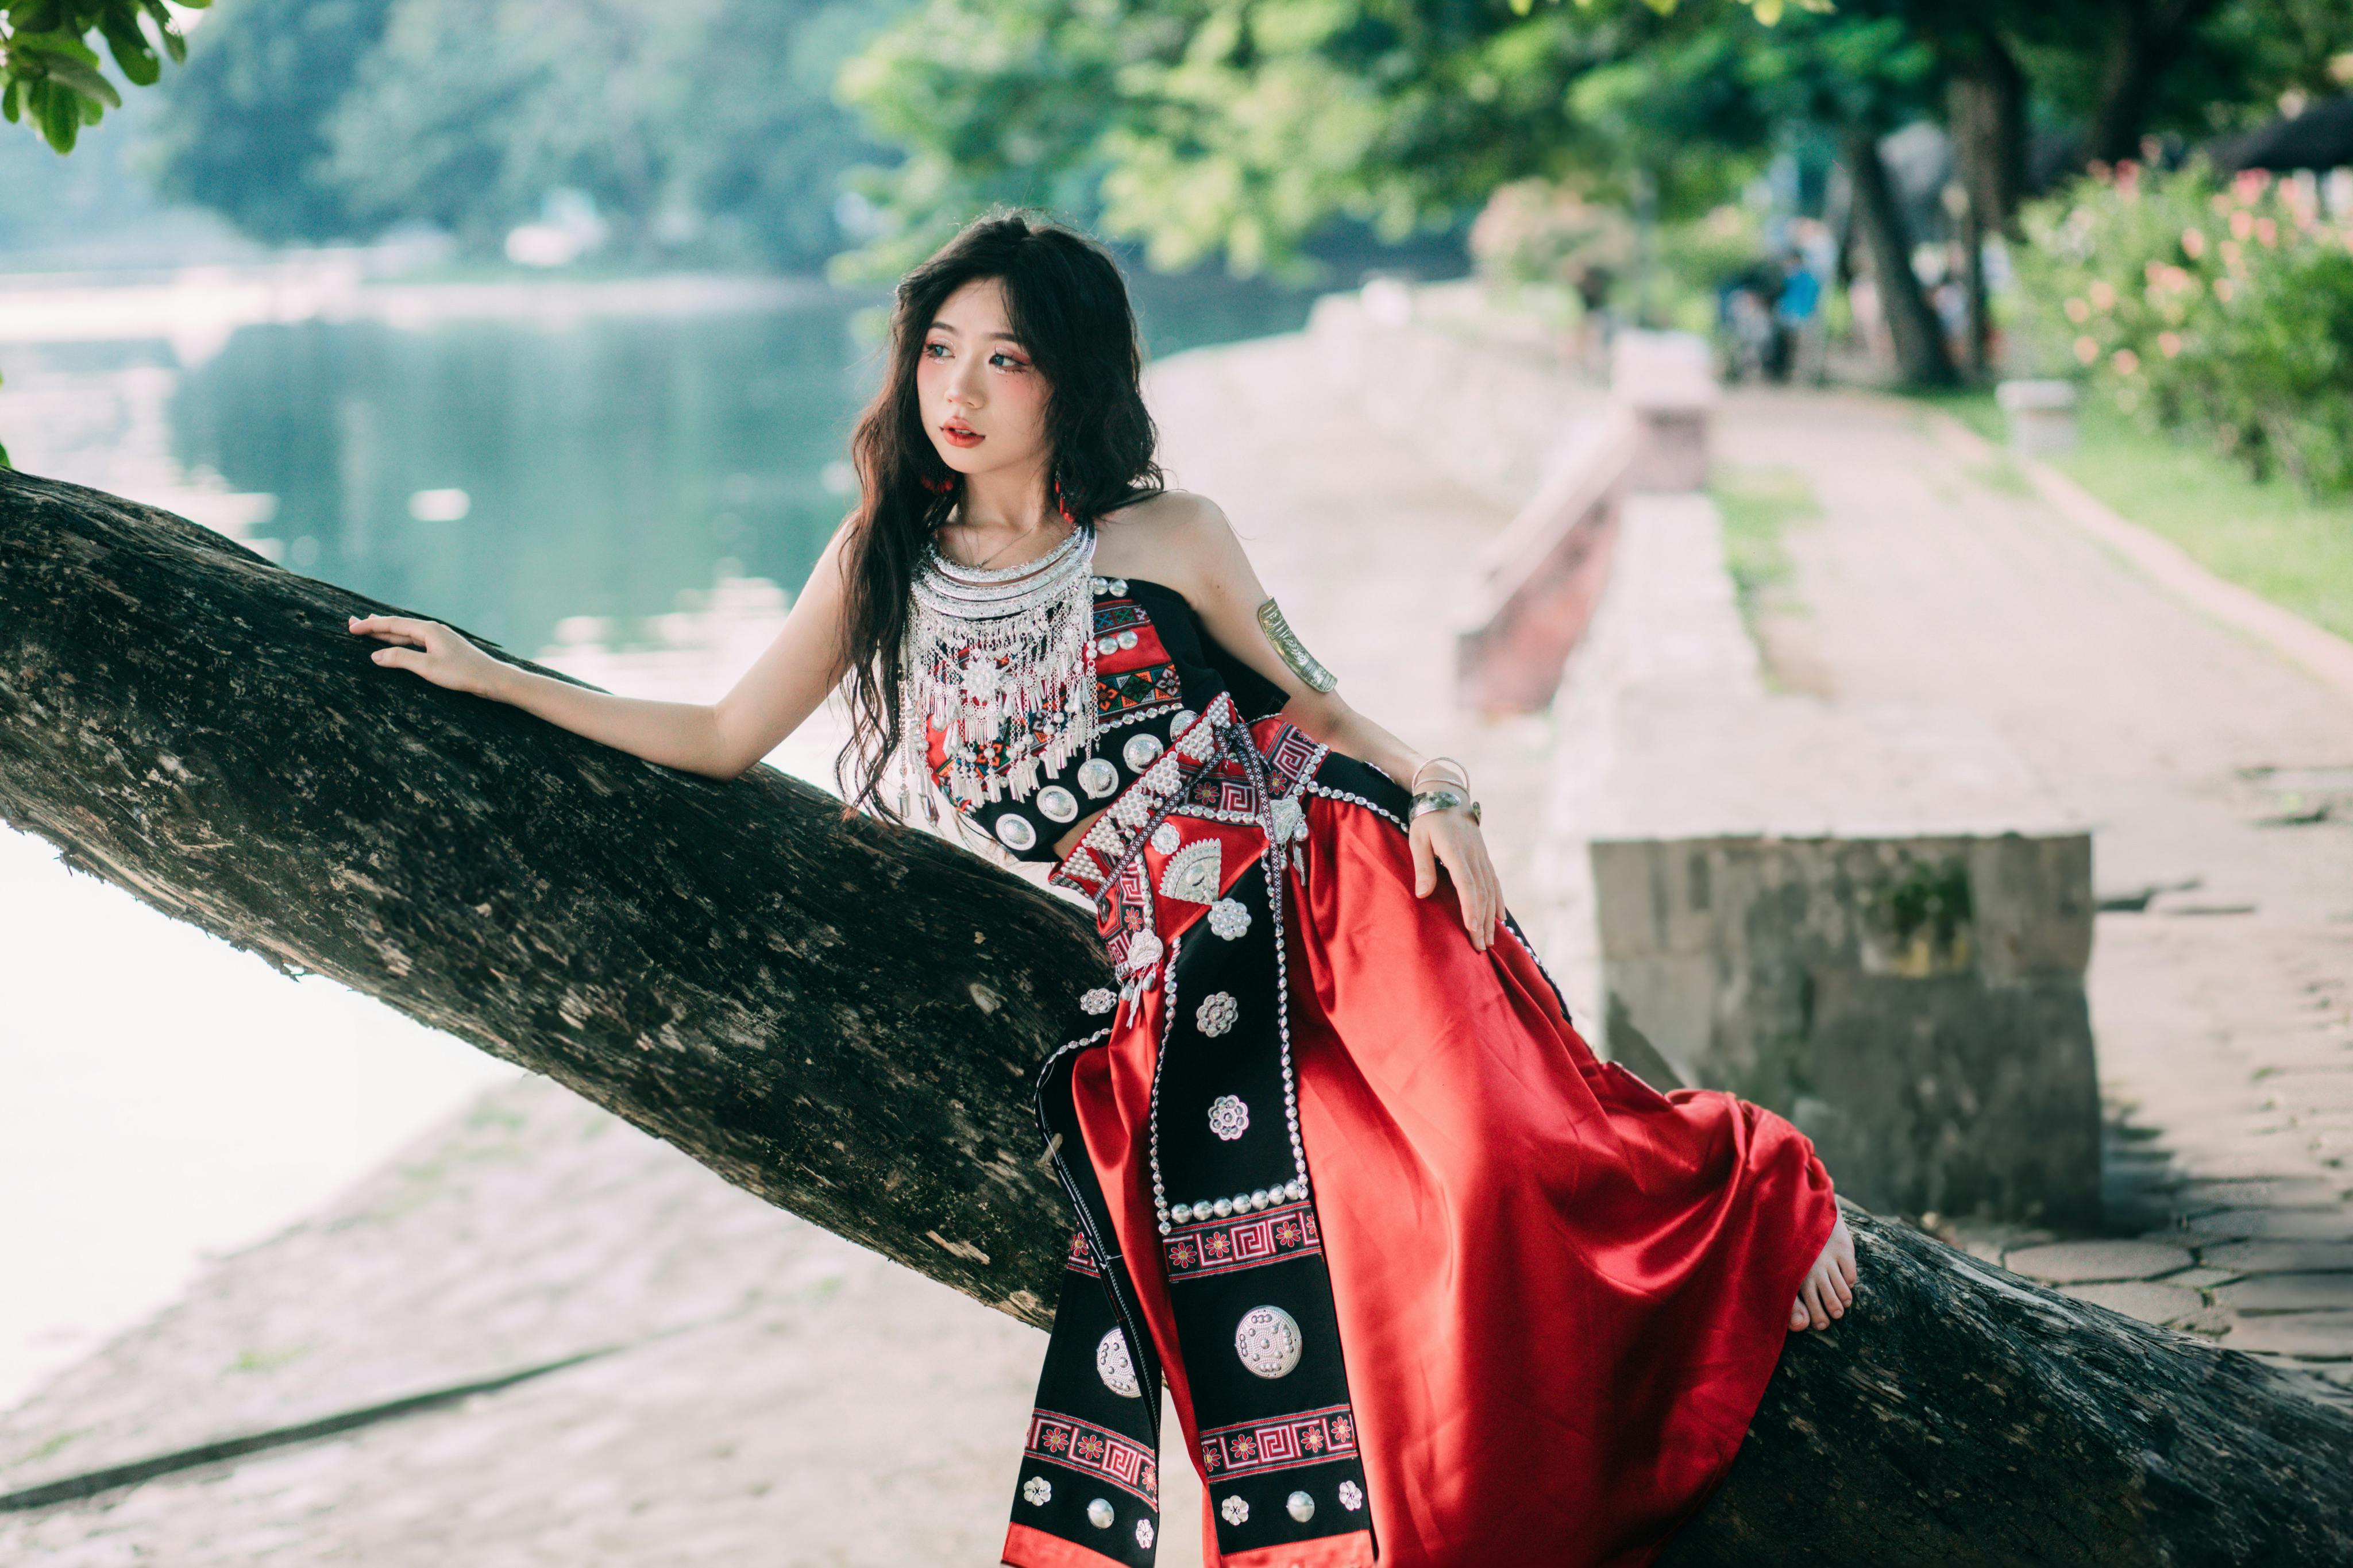 Free Photos - A Beautiful Indian Woman Wearing Traditional Clothing,  Possibly A Bridal Outfit, As She Poses On A Beach. Her Attire Includes An  Orange And Gold Dress, Complemented By A Red